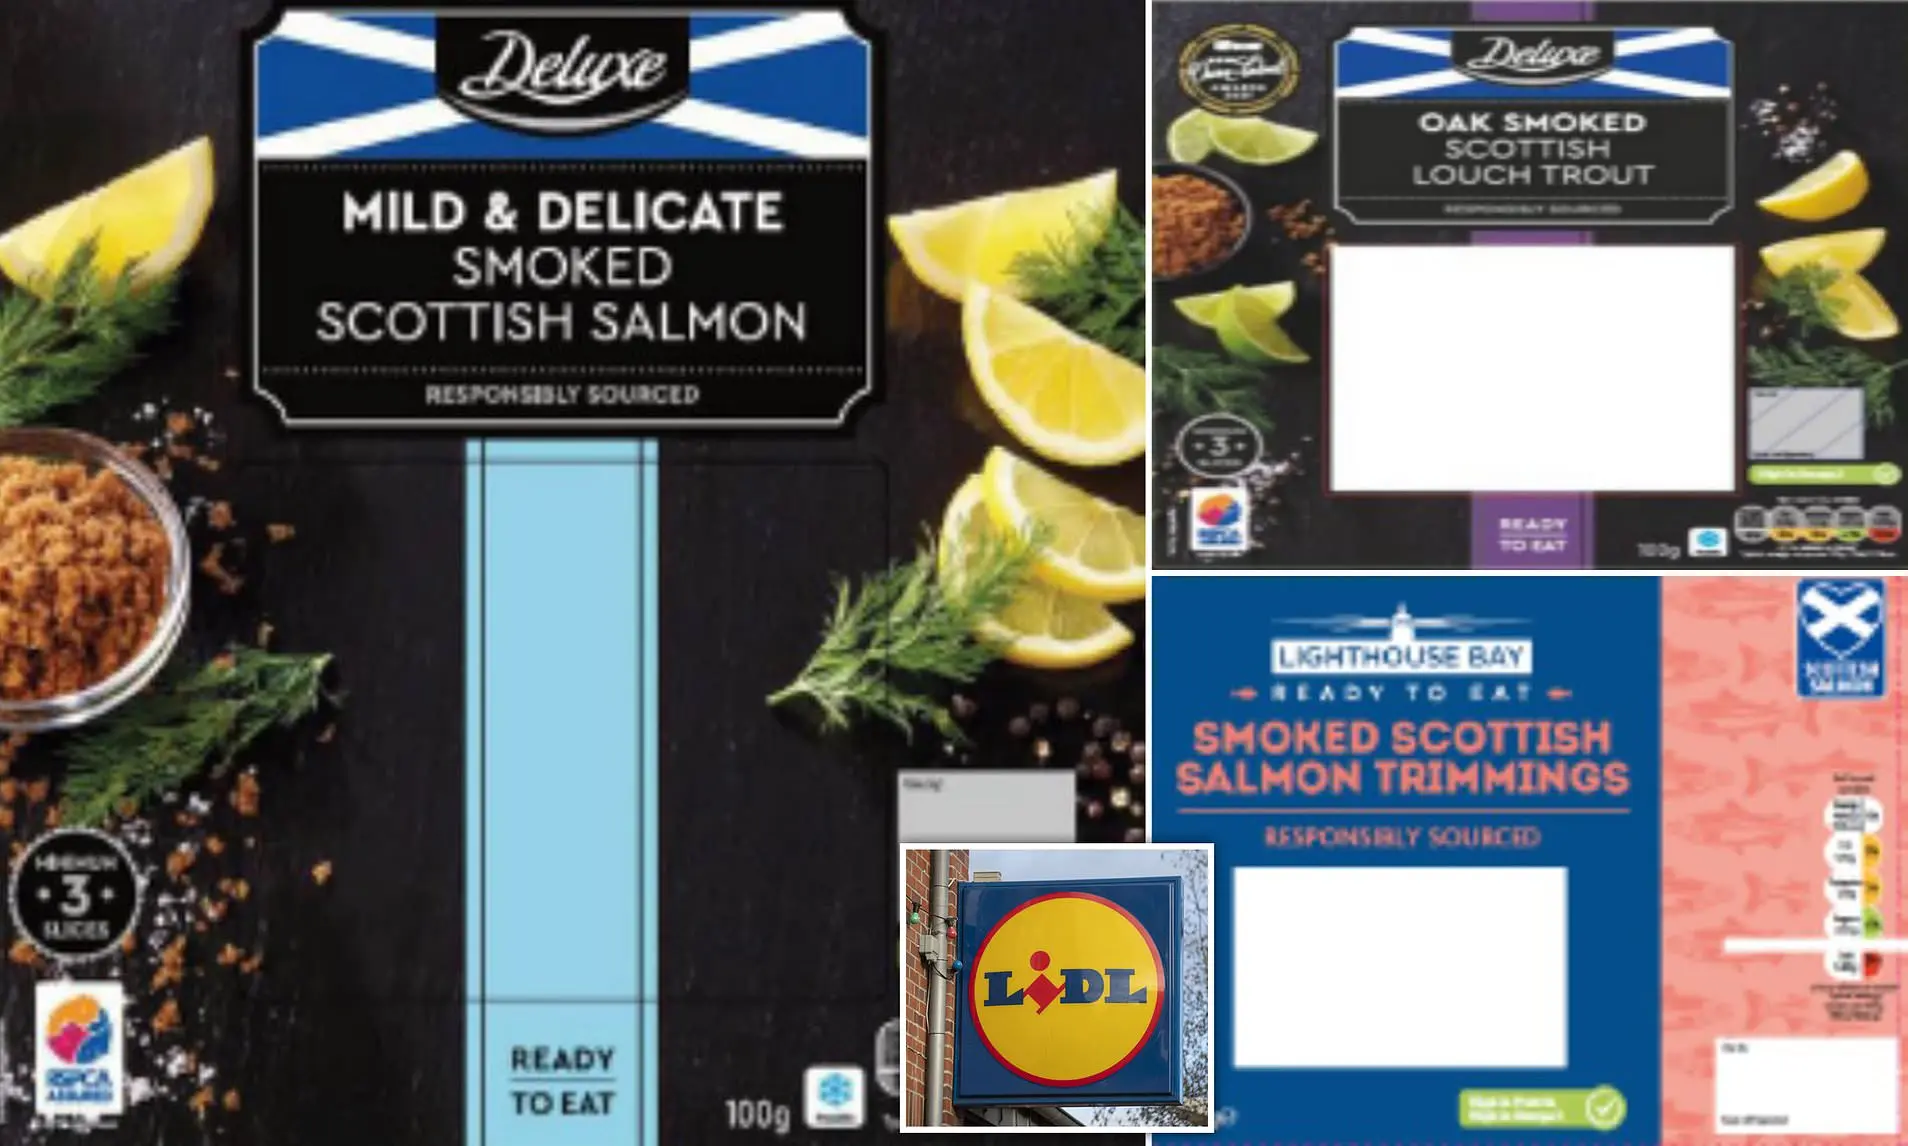 lidl smoked salmon recall - What brand of smoked salmon is recalled